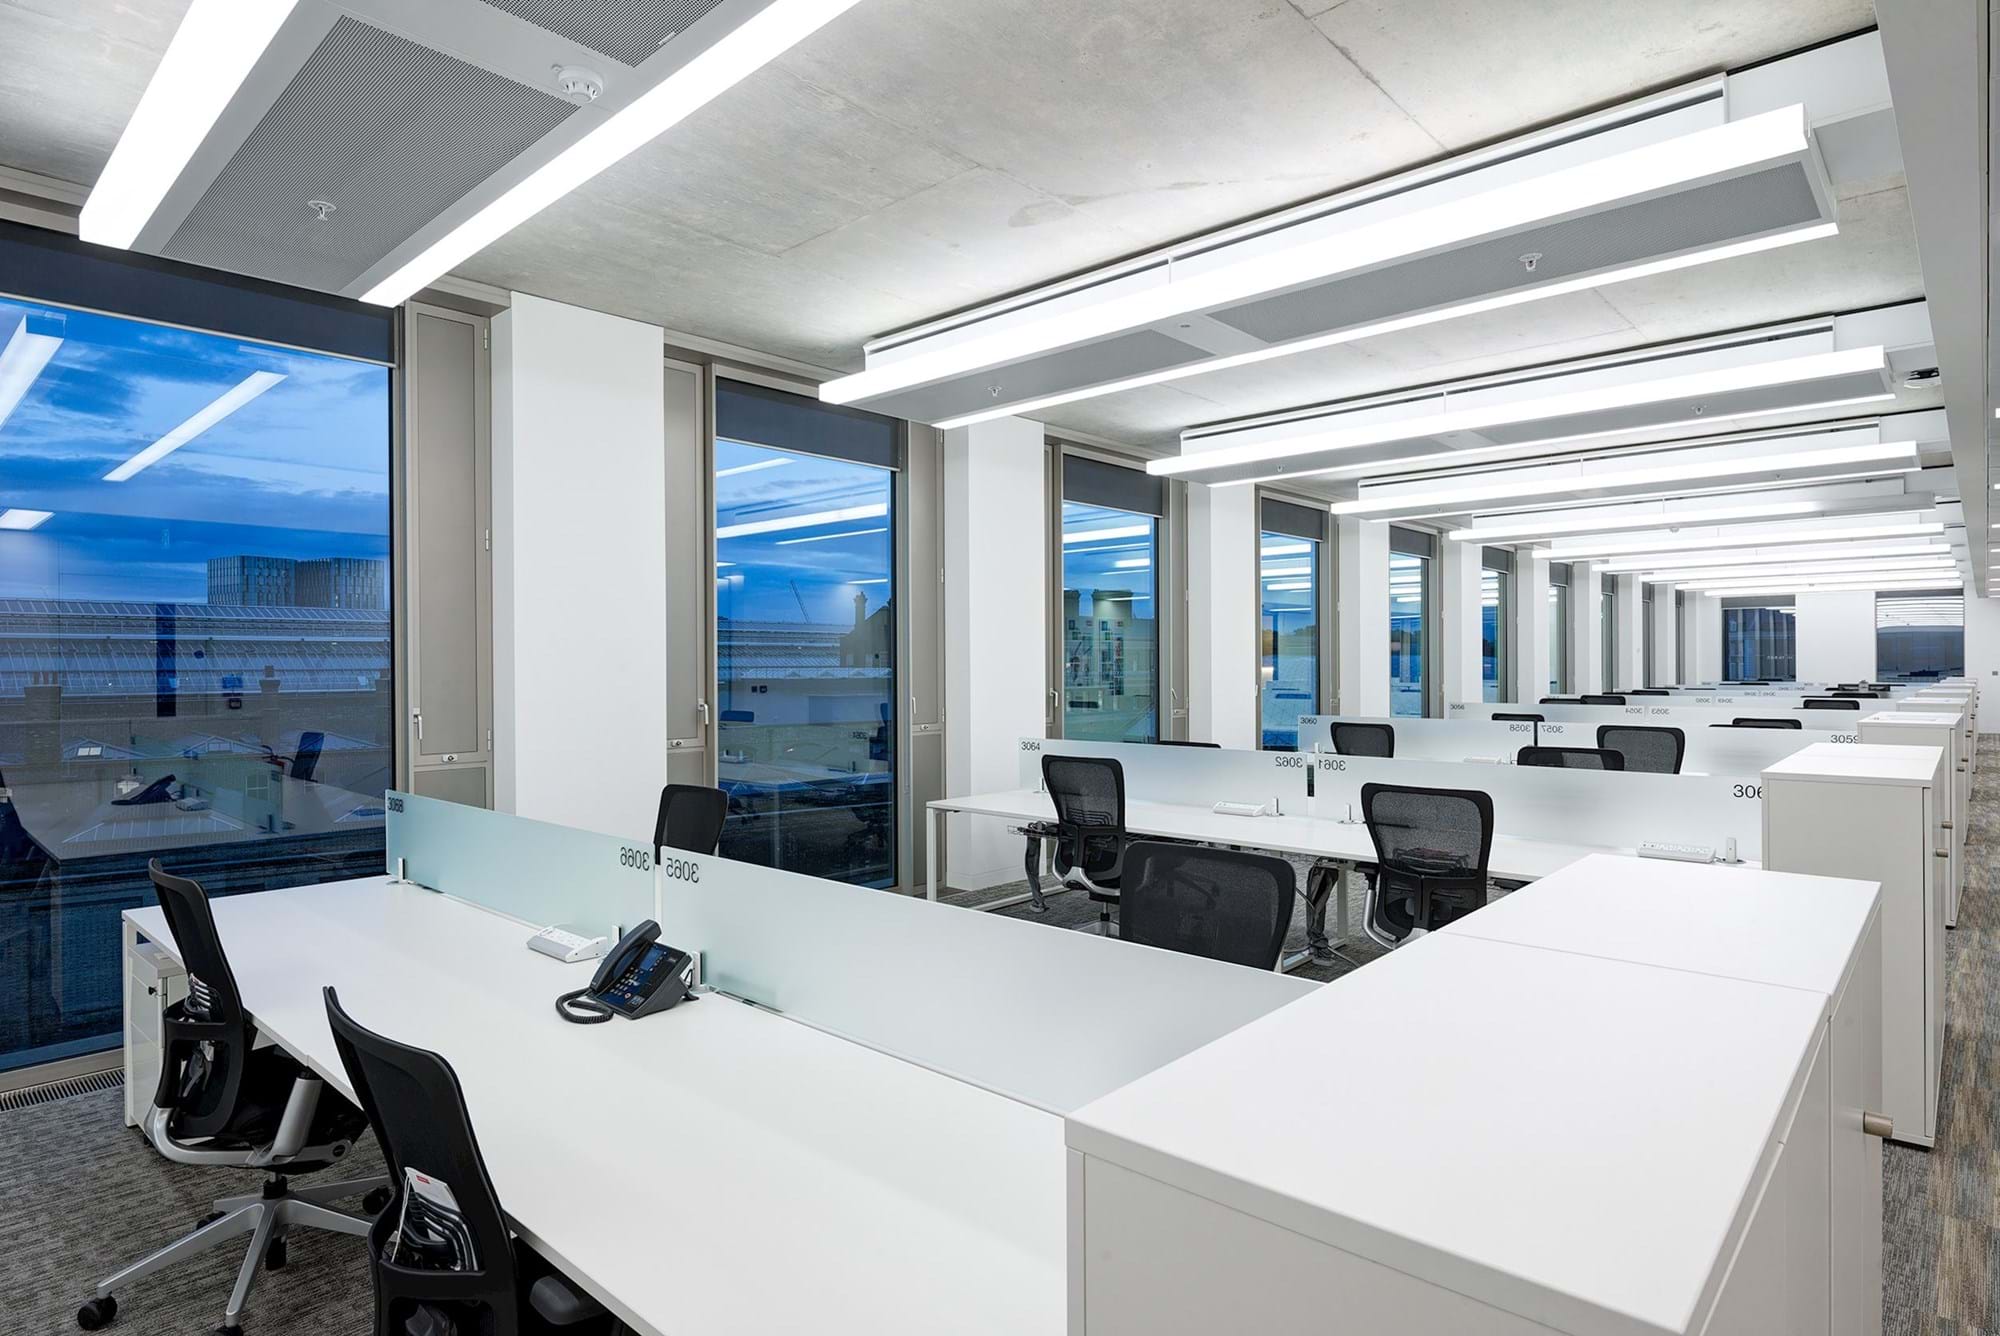 Modus Workspace office design, fit out and refurbishment - IT Company - Open Plan Office - CSG London 04 highres sRGB.jpg